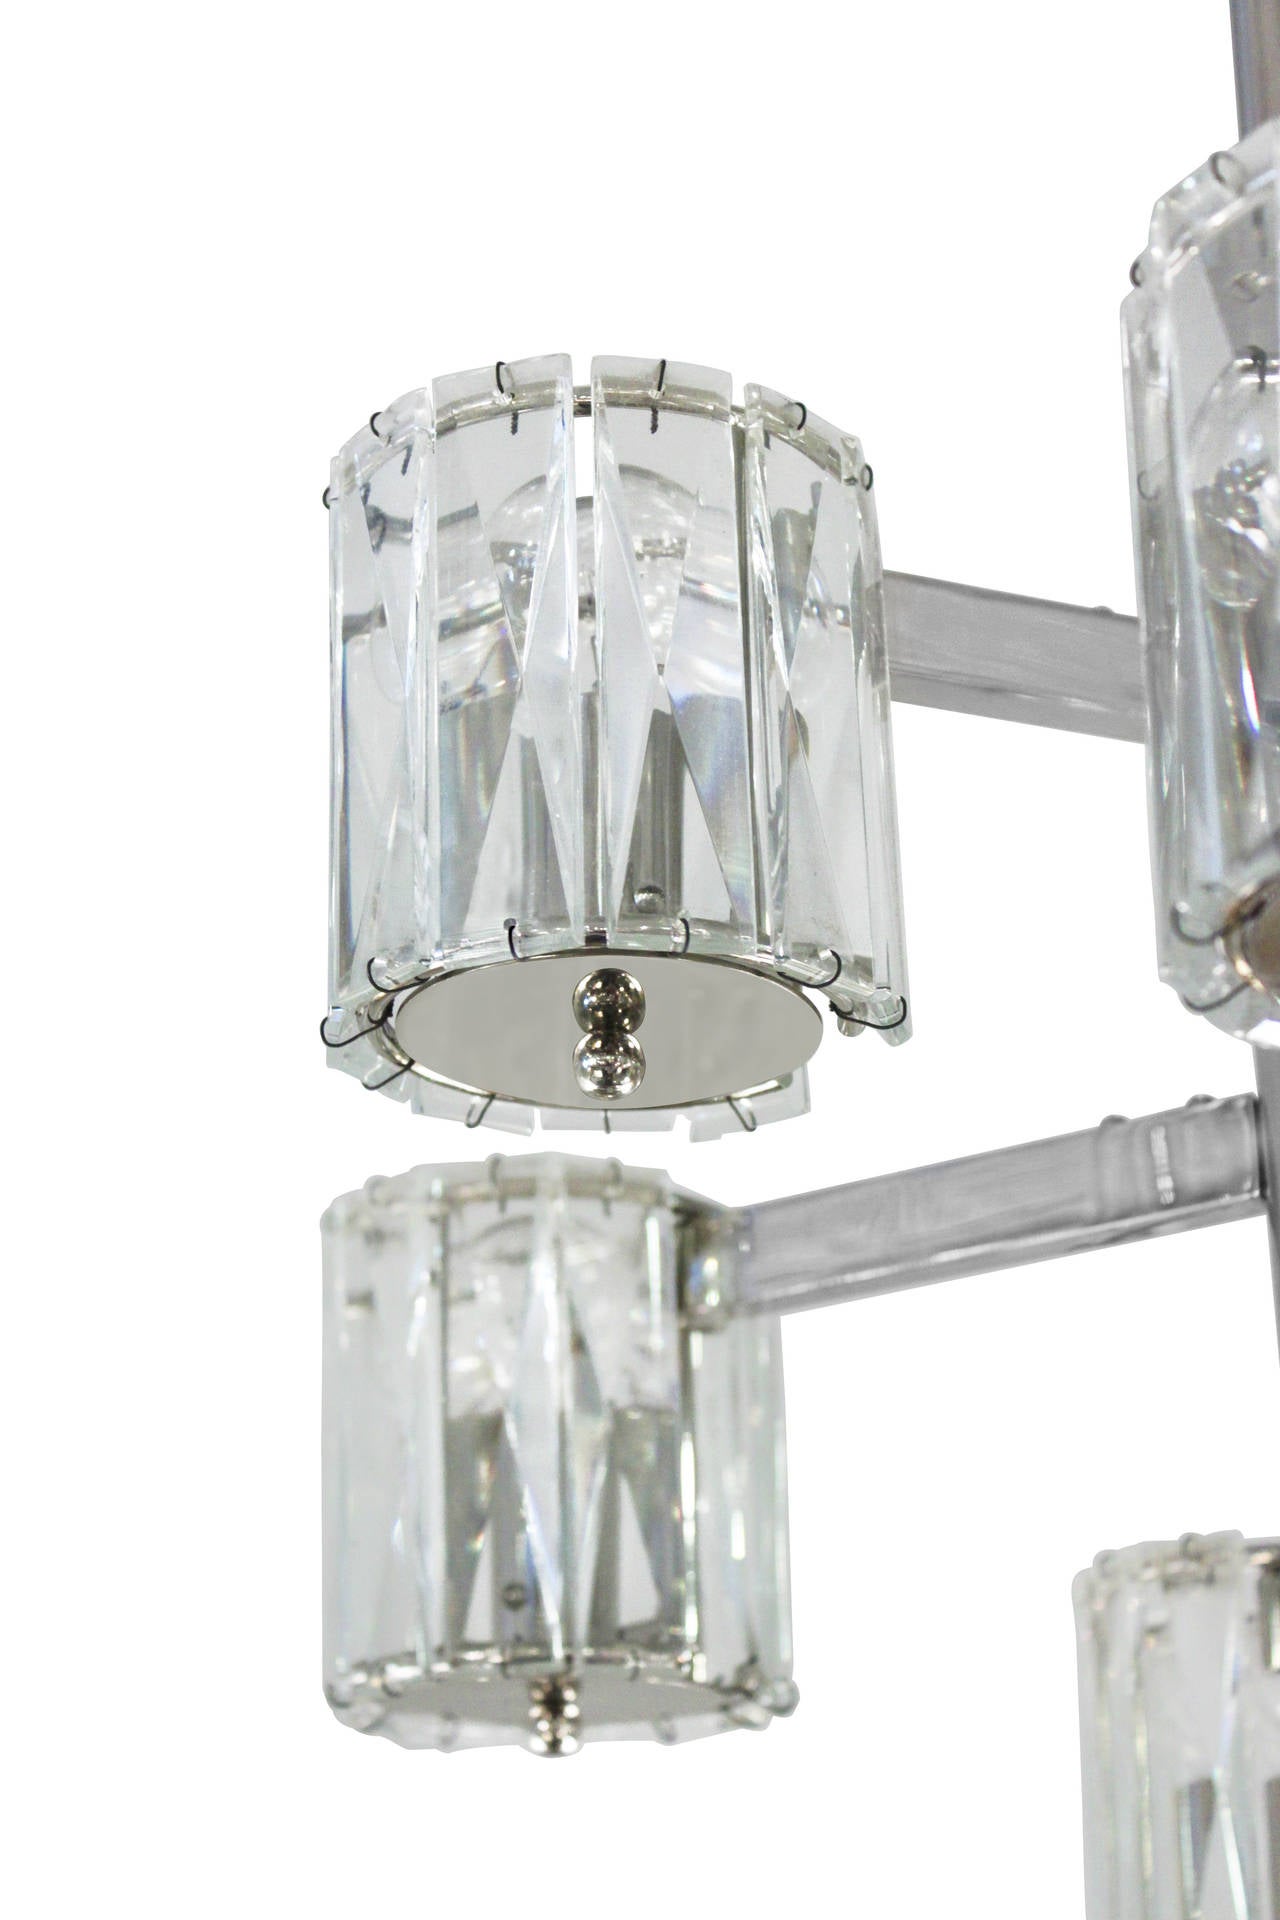 Mid-Century Modern Chandelier in Chrome with Six Arms and Cut Crystals by Lobmeyr